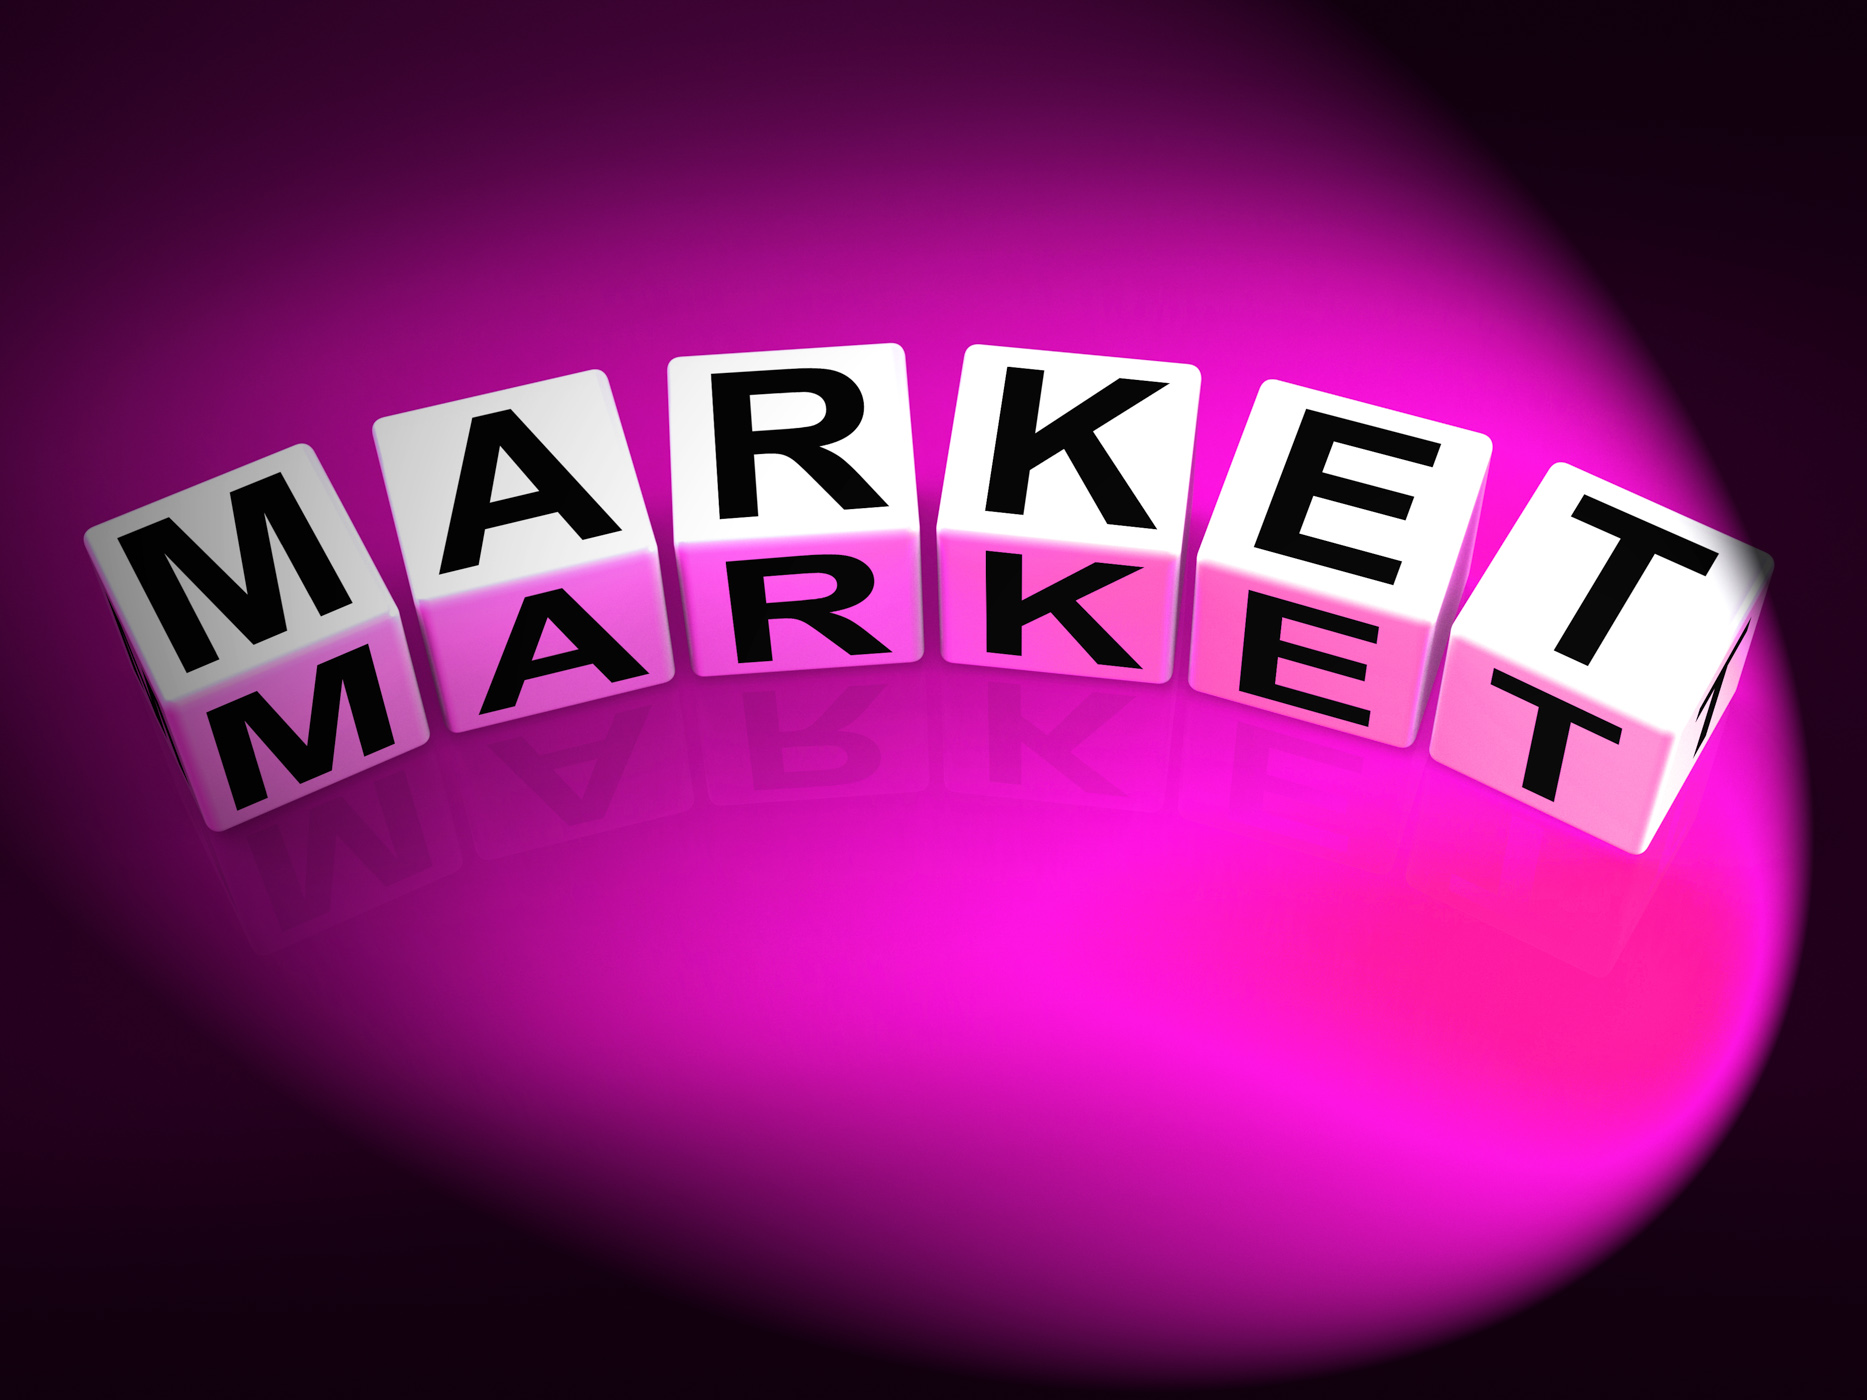 Market dice indicate retail promotions or forex trading photo